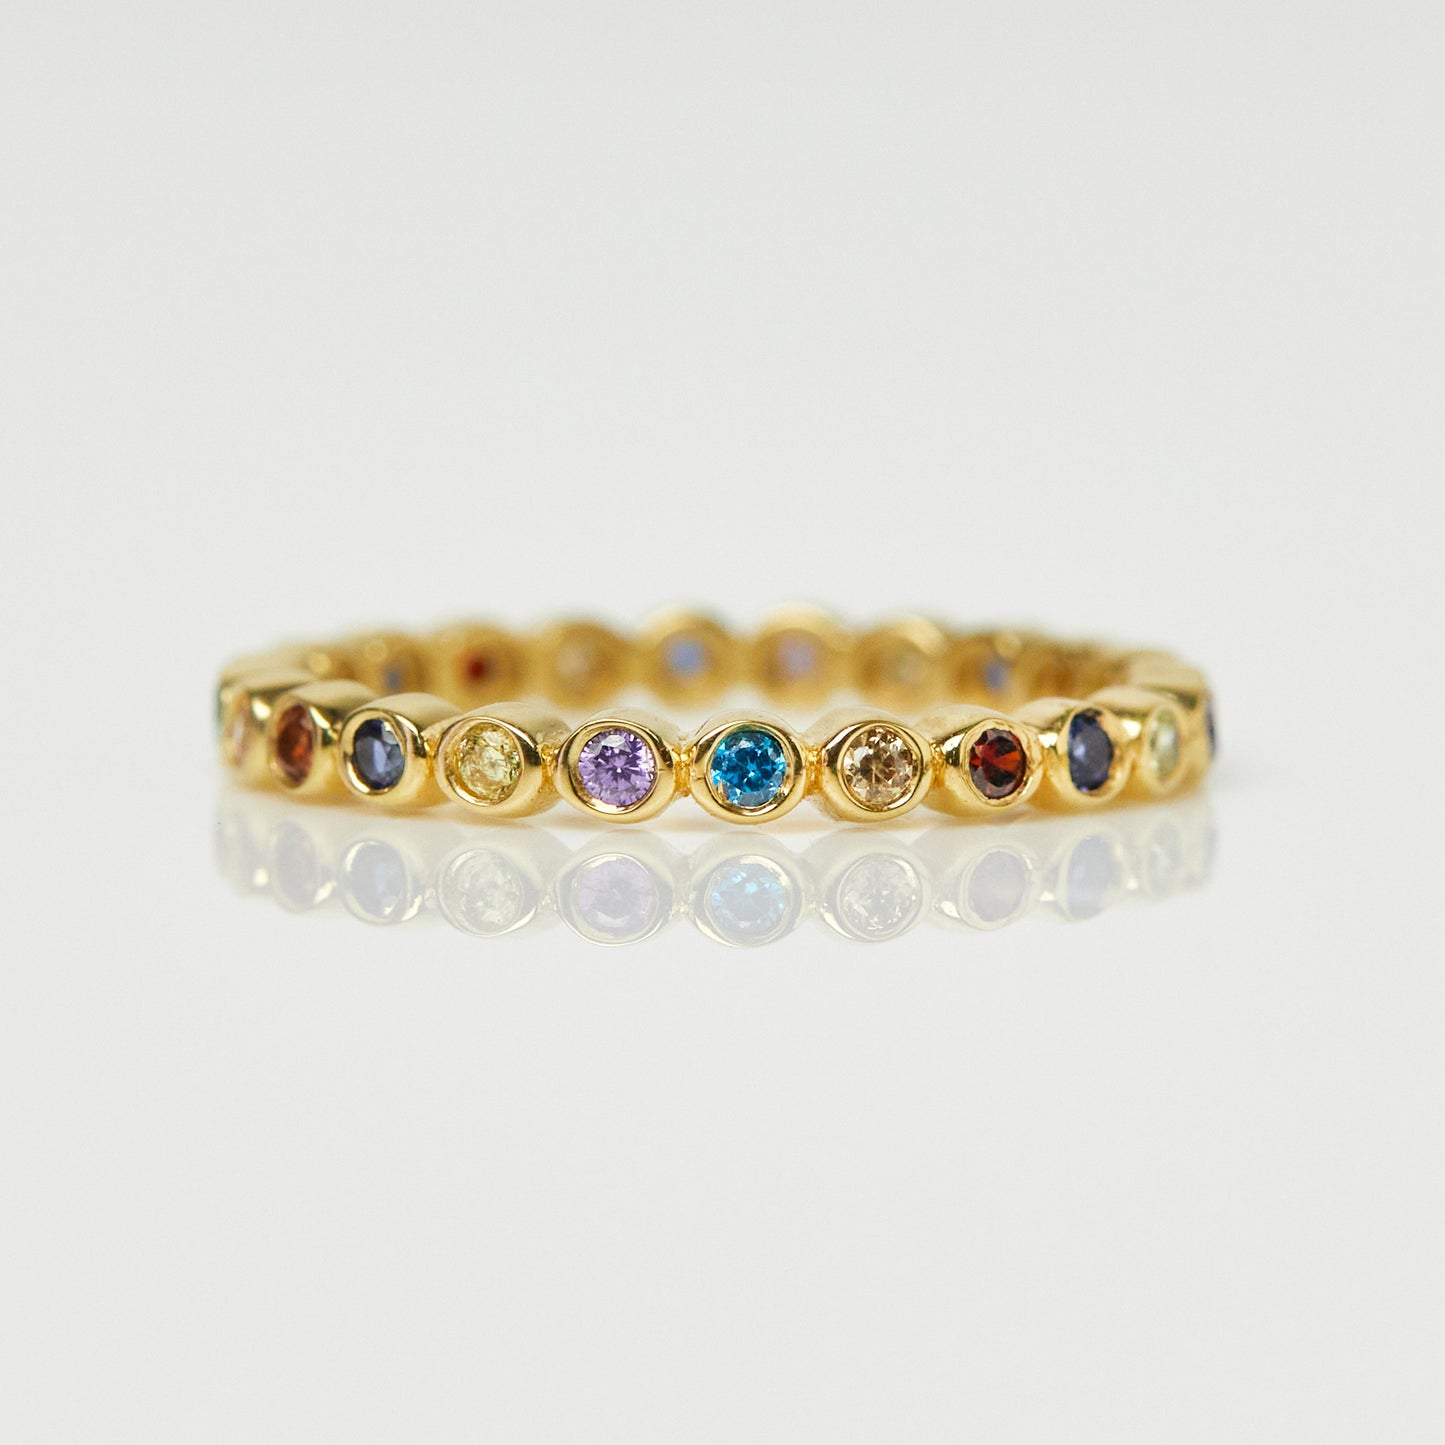 Stunning gold vermeil rings crafted by Carrie Elizabeth Jewellery 